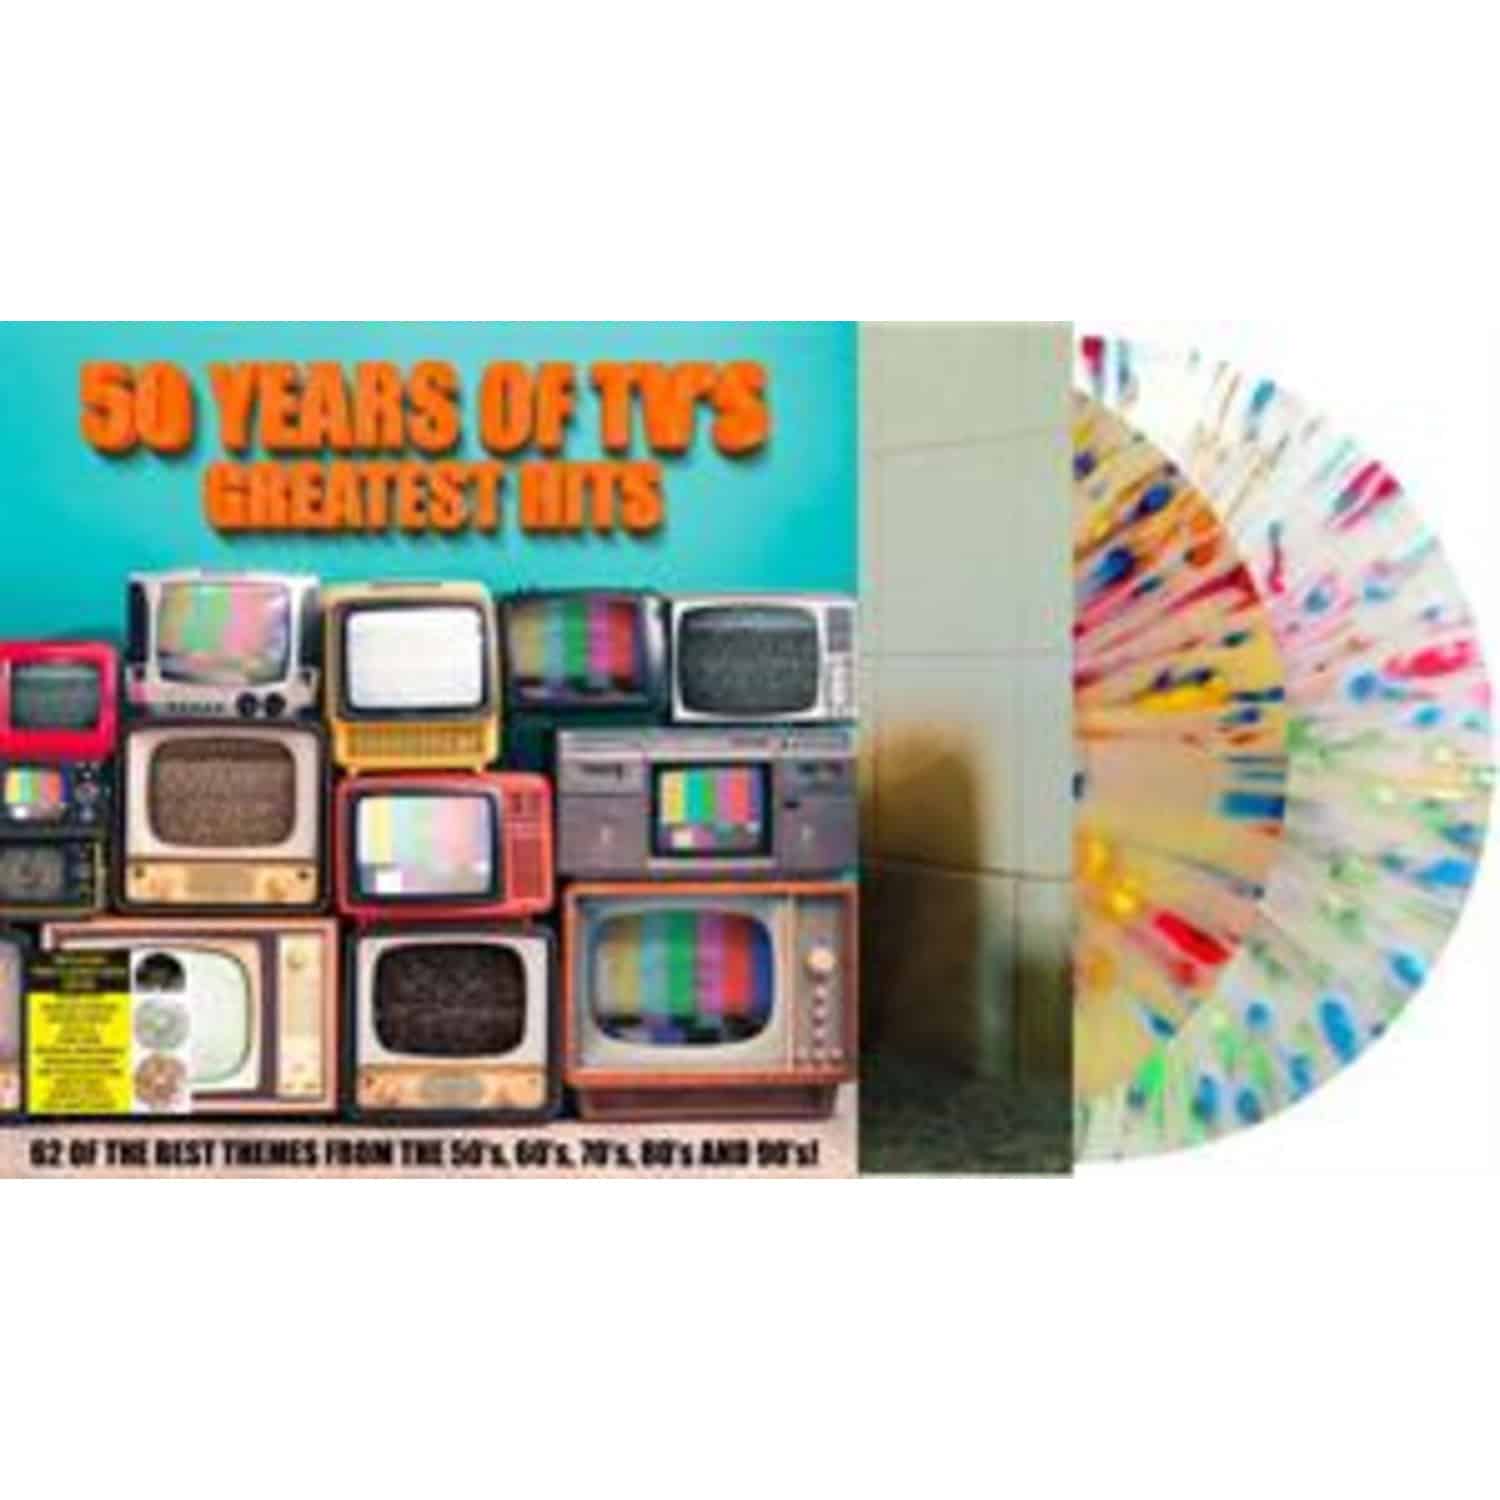 OST/Various - 50 YEARS OF TV S GREATEST HITS 